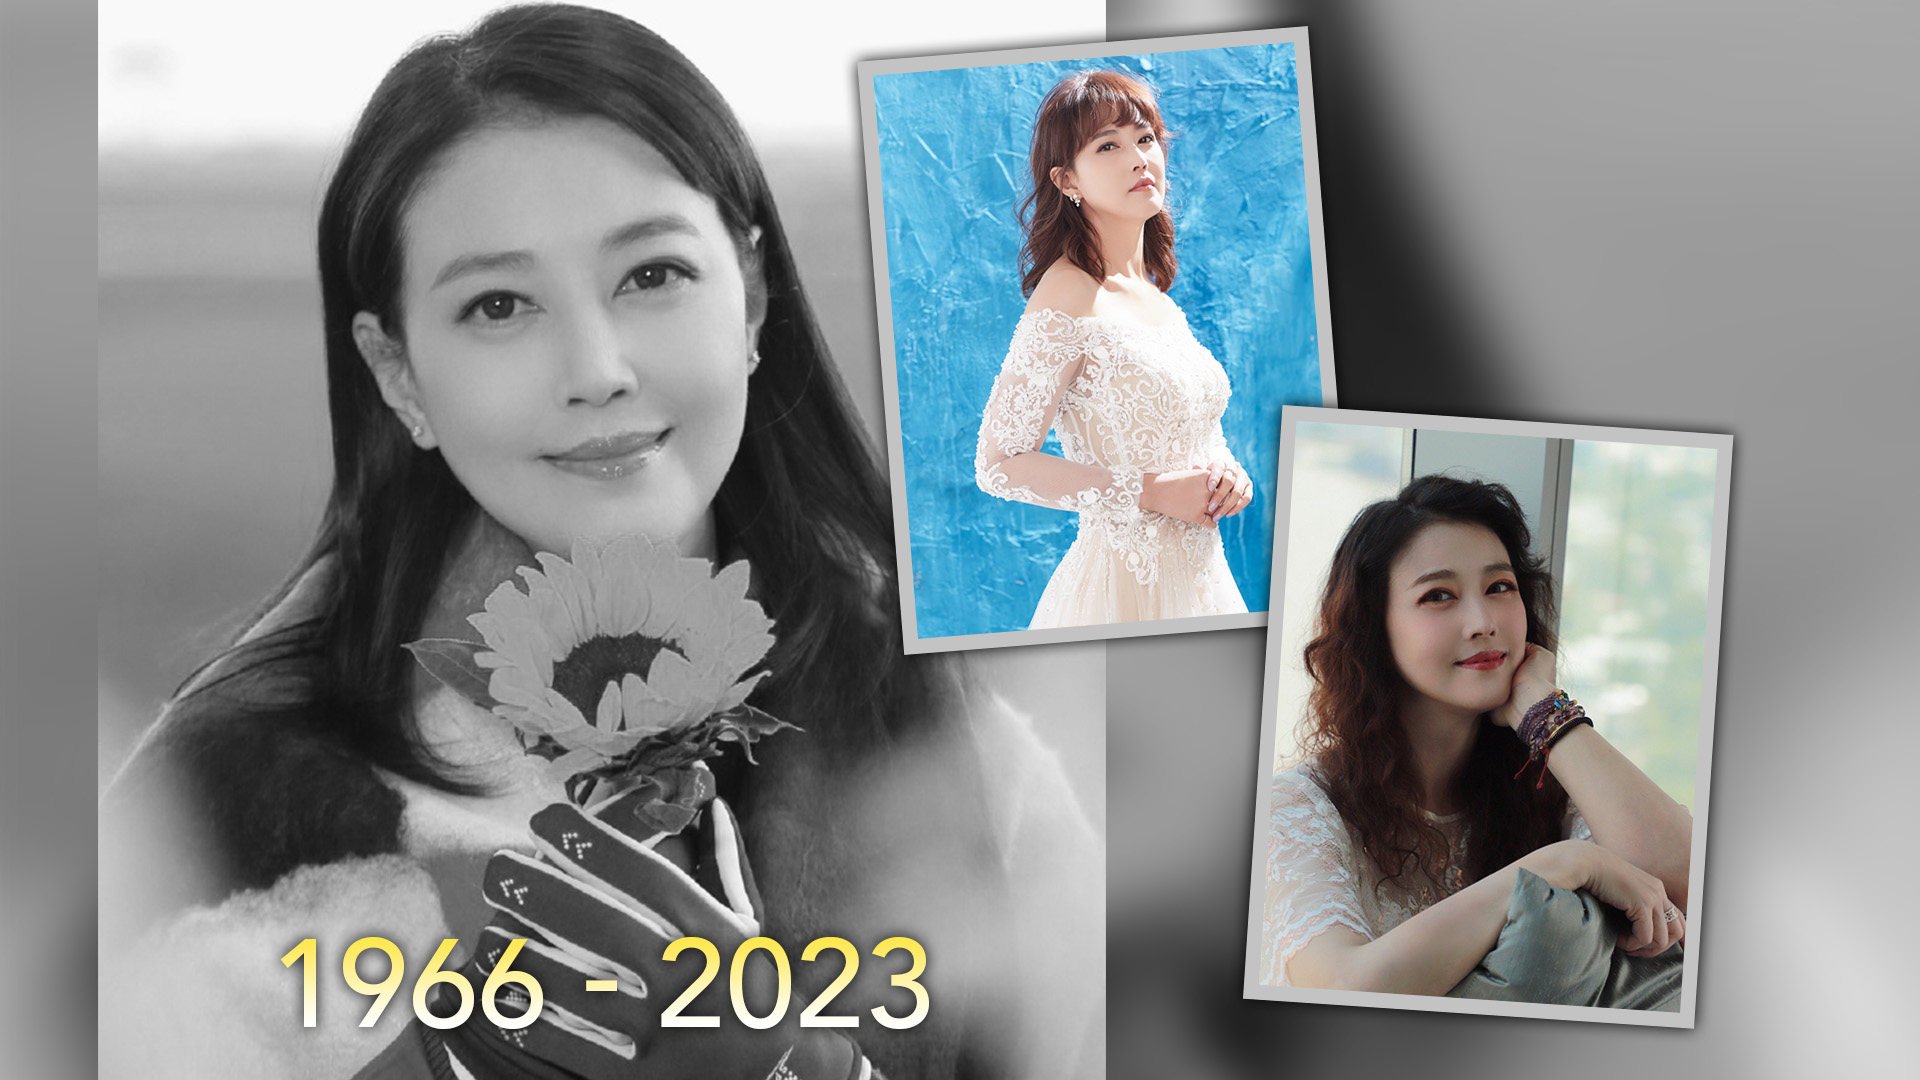 On her 57th birthday, which took place on December 6, Chow shared a heartwarming video and conveyed her heartfelt appreciation for the unwavering support from her beloved fans throughout the years. Photo: SCMP composite/Weibo

